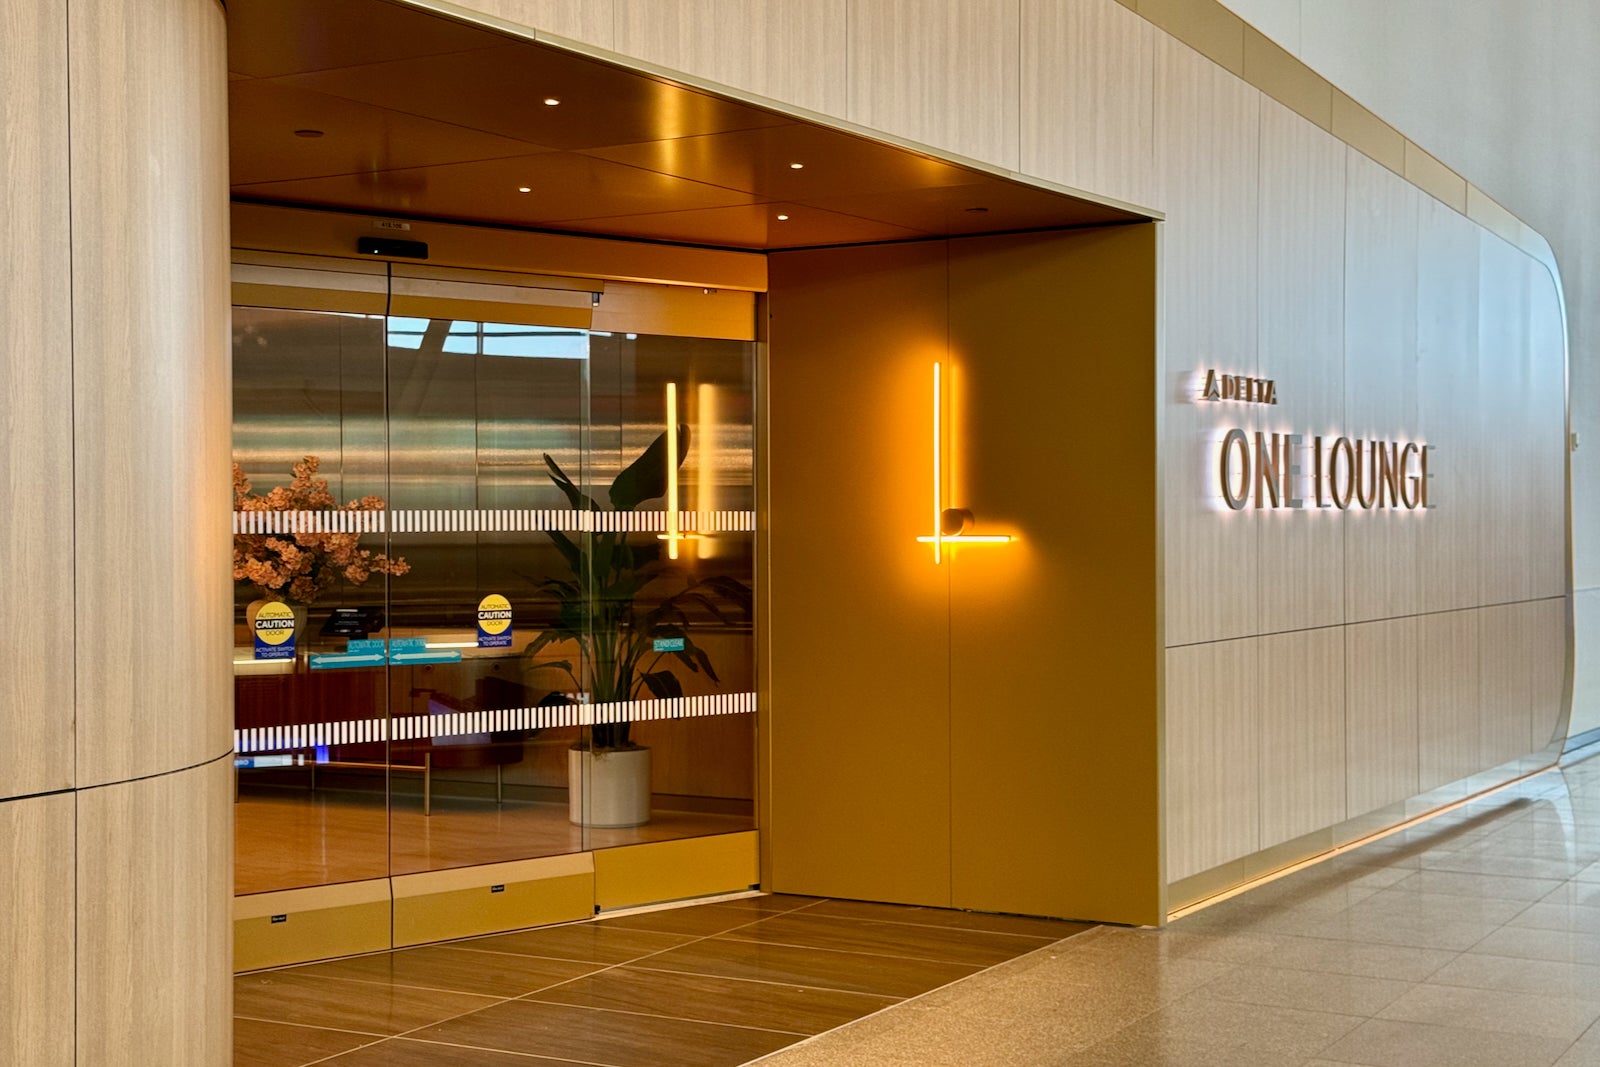 Read more about the article The biggest news about the new Delta One Lounge may surprise you and more tidbits